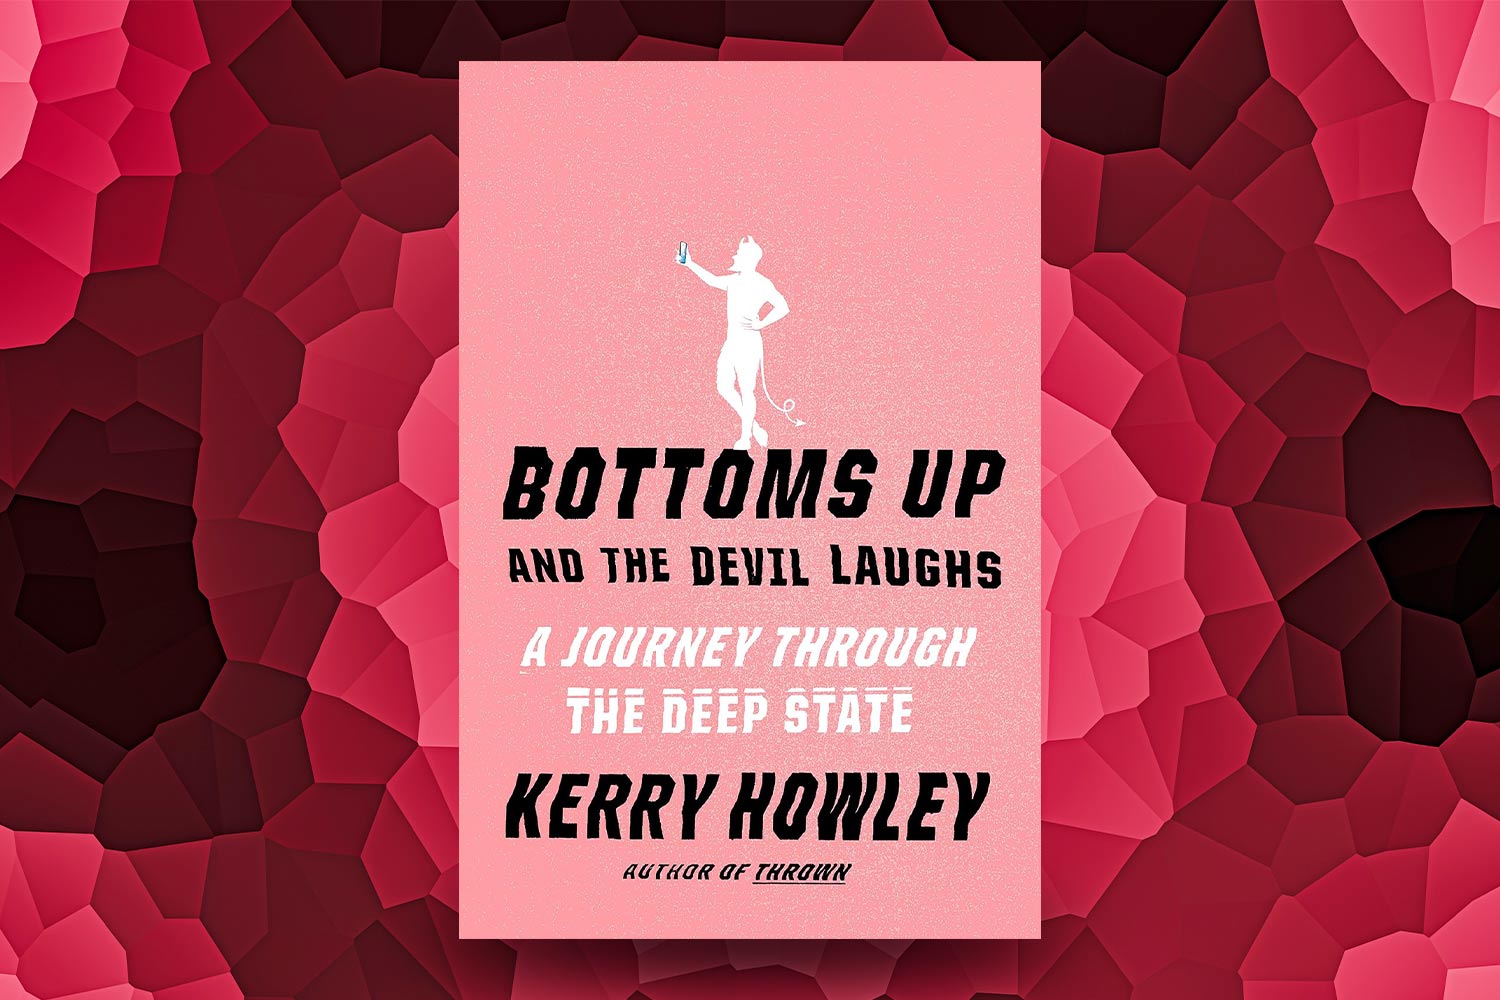 Kerry Howley, Bottoms Up and the Devil Laughs